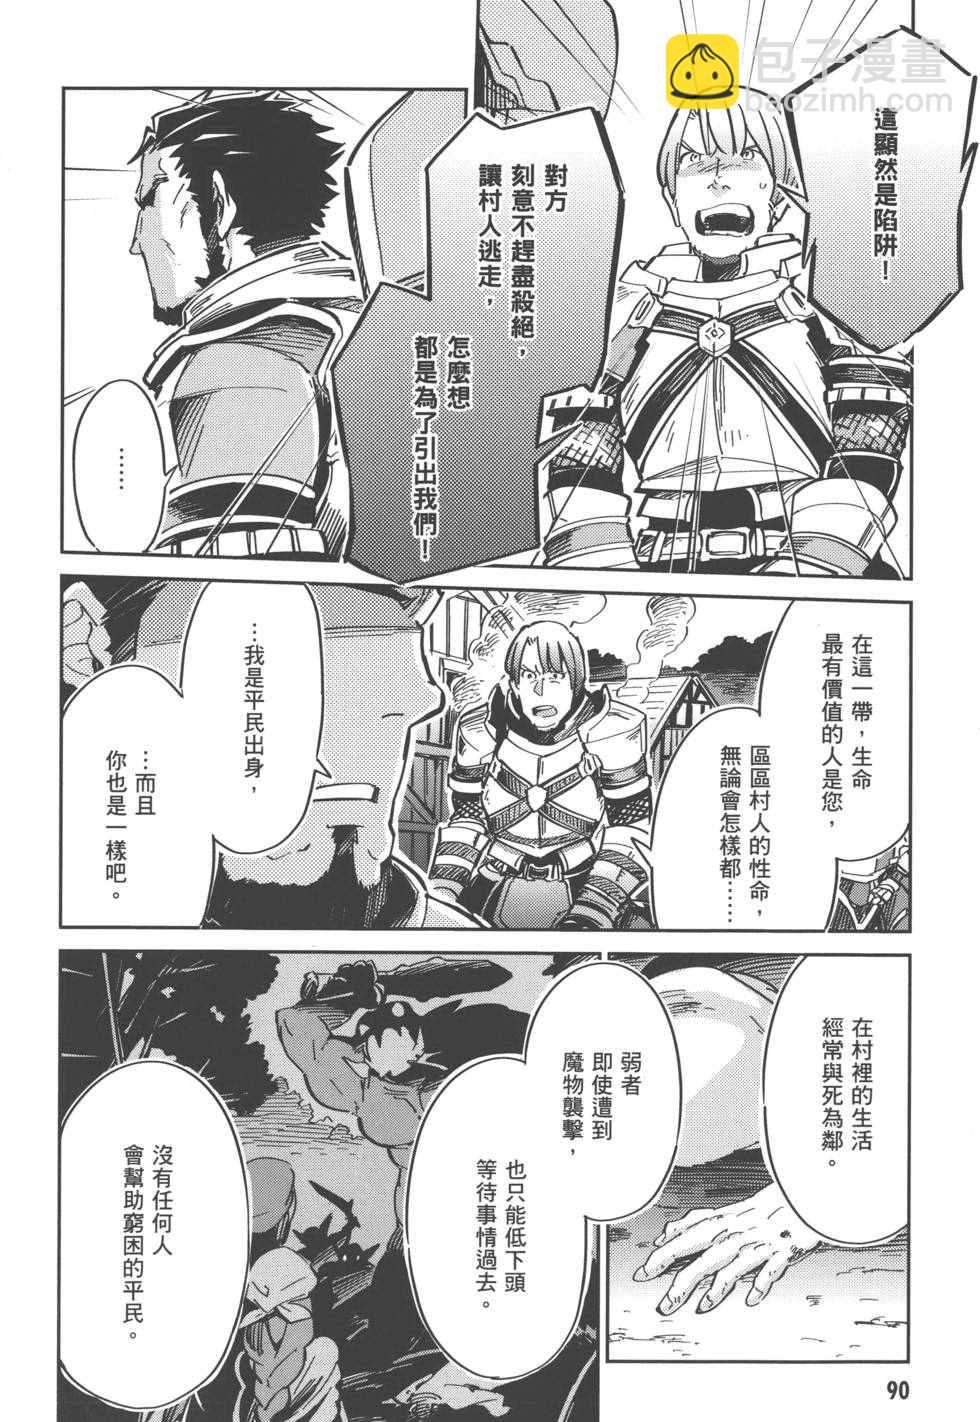 OVERLORD - 第1卷(2/4) - 6